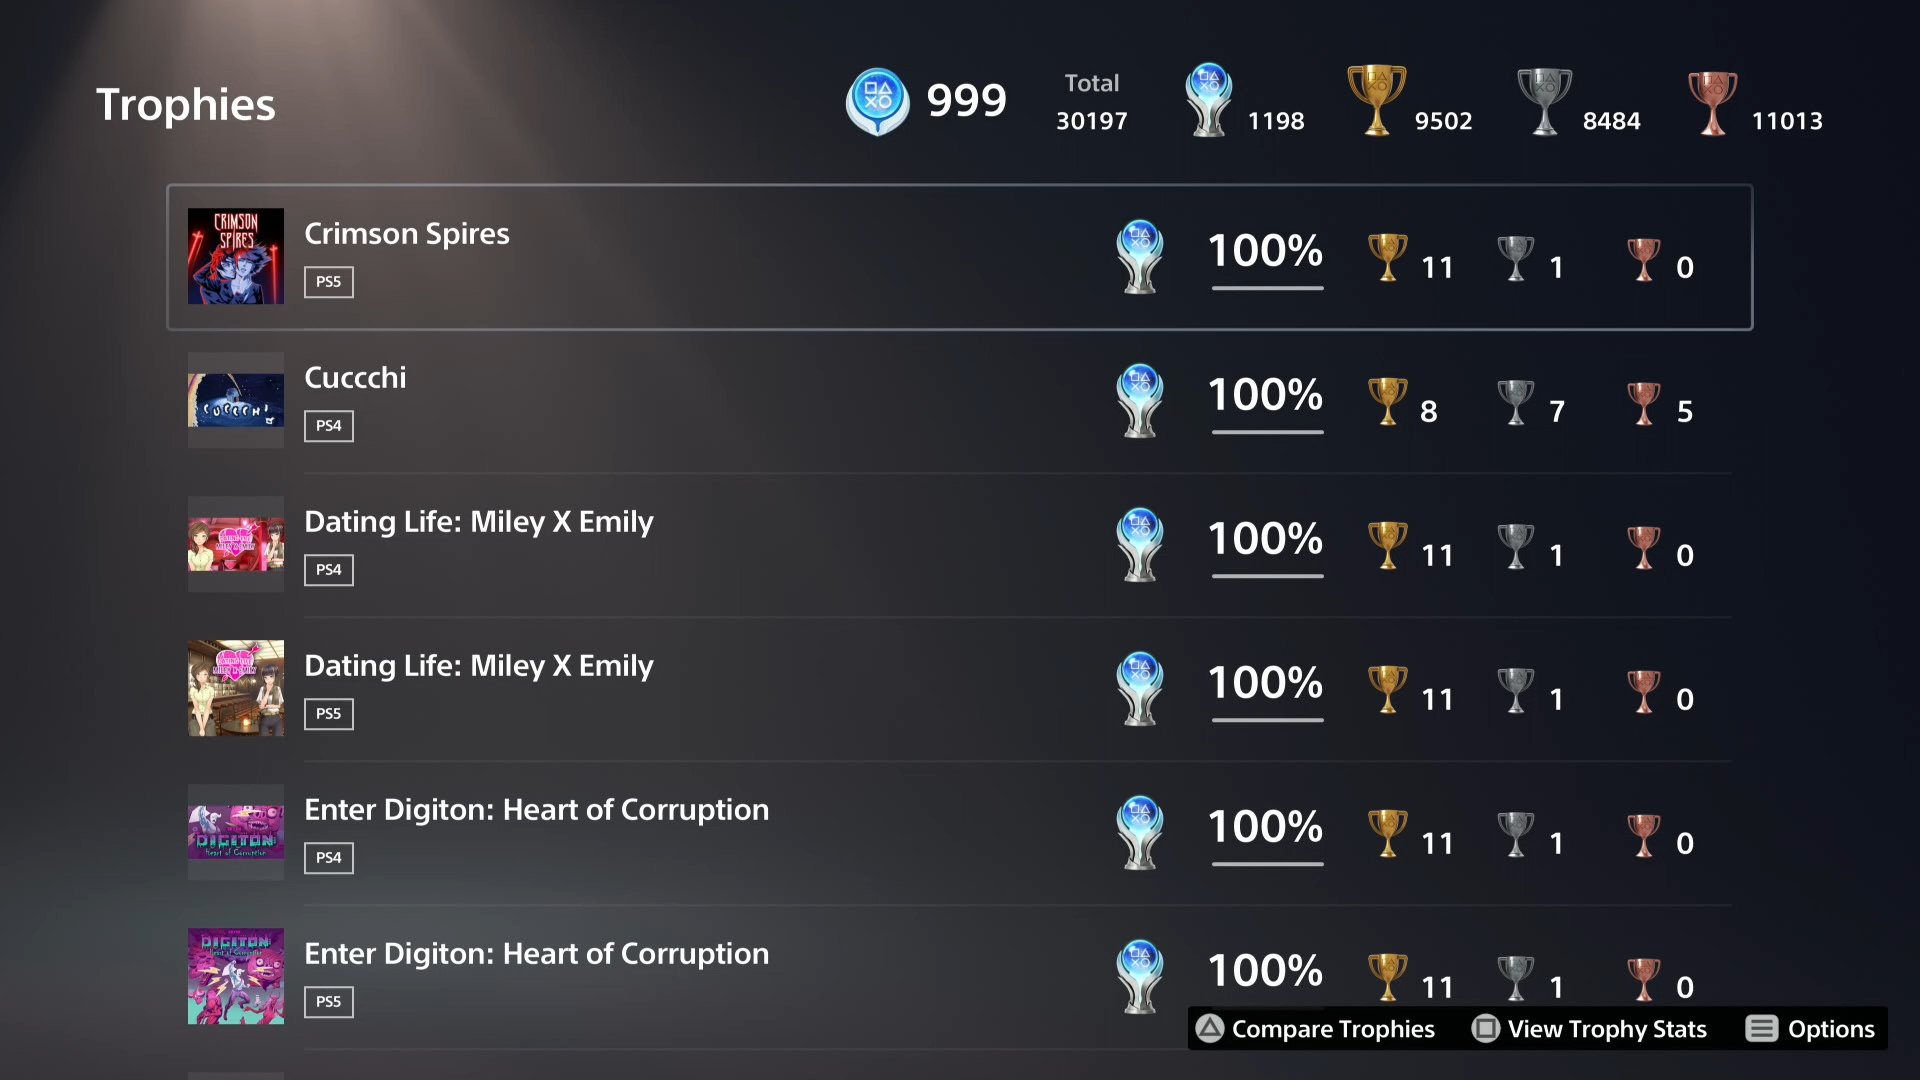 Arne uophørlige Goodwill IBadDriverI on Twitter: "🥳 Ohh i reached level 999 💪🏼 Time to get a life  😜😜 #PS4 #PS5 #PS4share #PS5Share #PlayStation #PlayStation5 #PlayStation4  #psn #PlayStationTrophy https://t.co/DyYjiMeM43" / Twitter